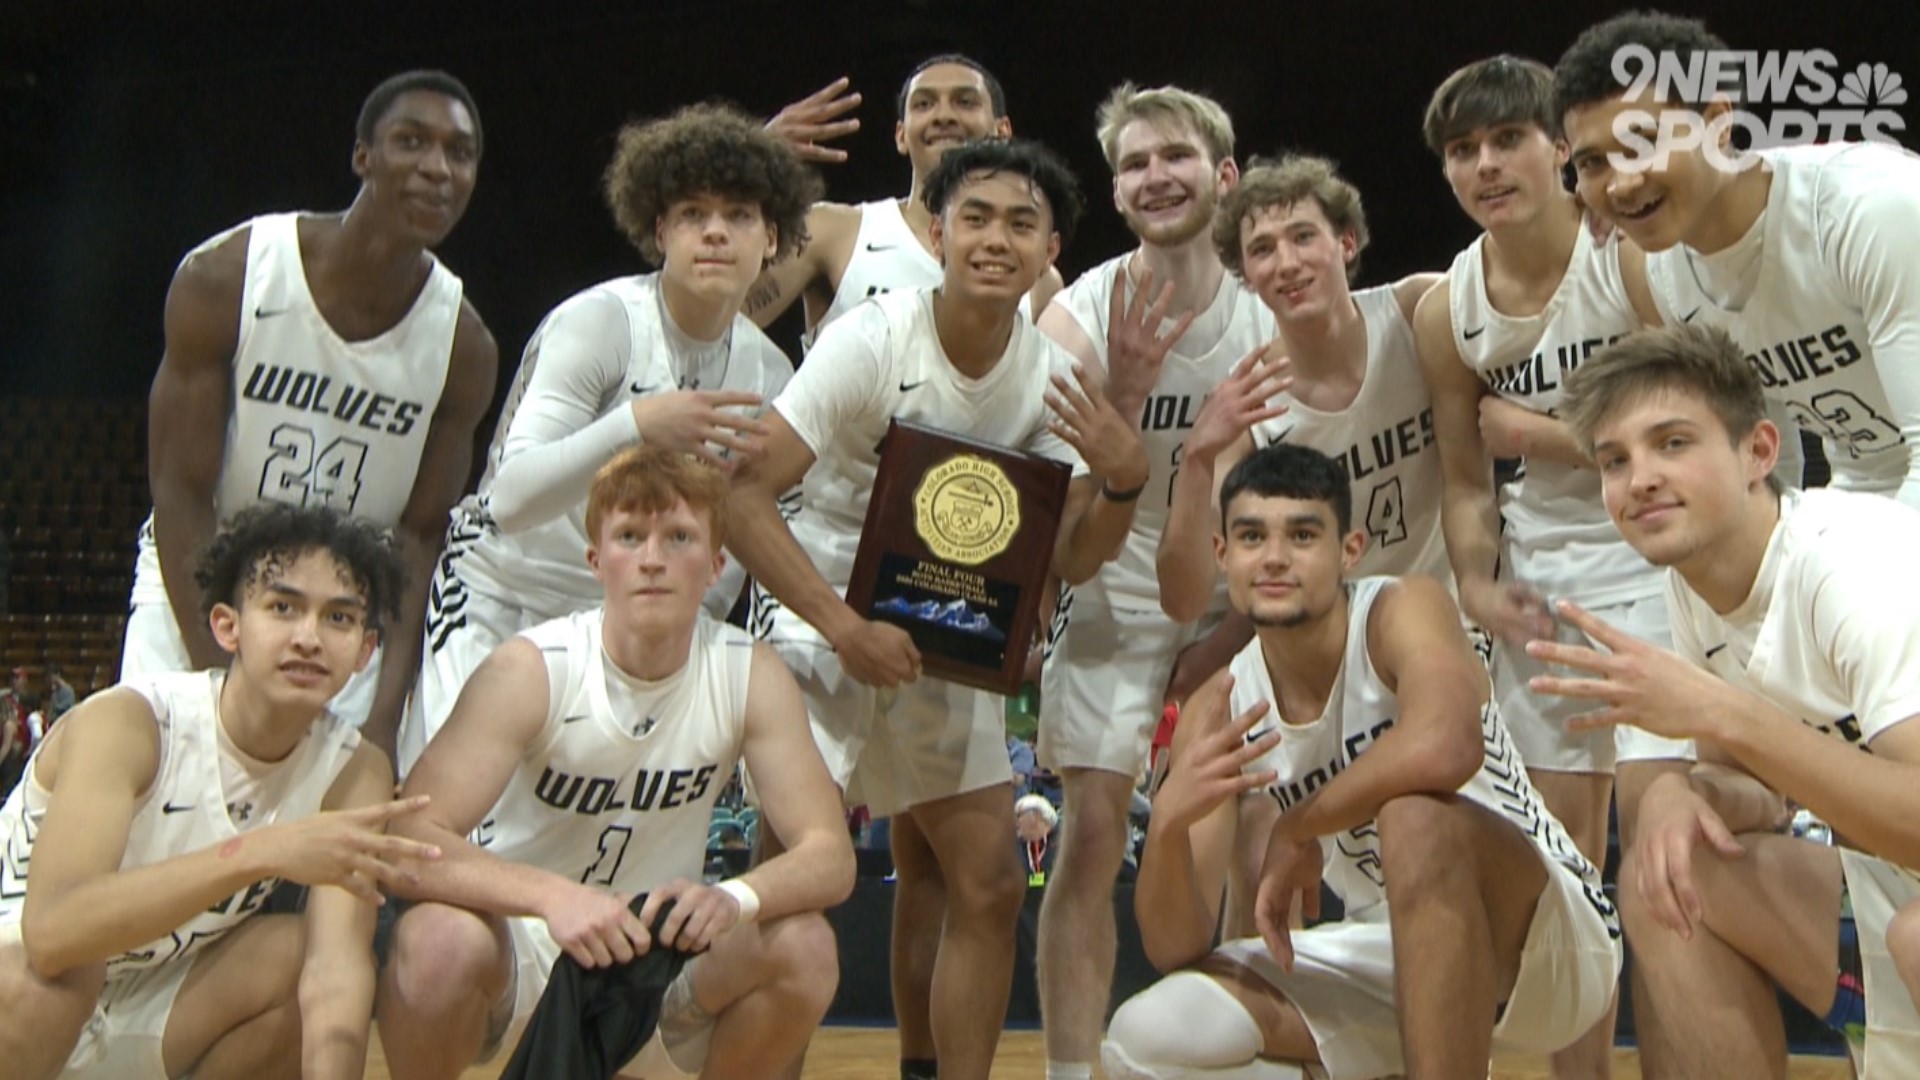 The Wolves topped the Raiders 48-41 on Saturday afternoon to advance to the Class 5A Final Four.